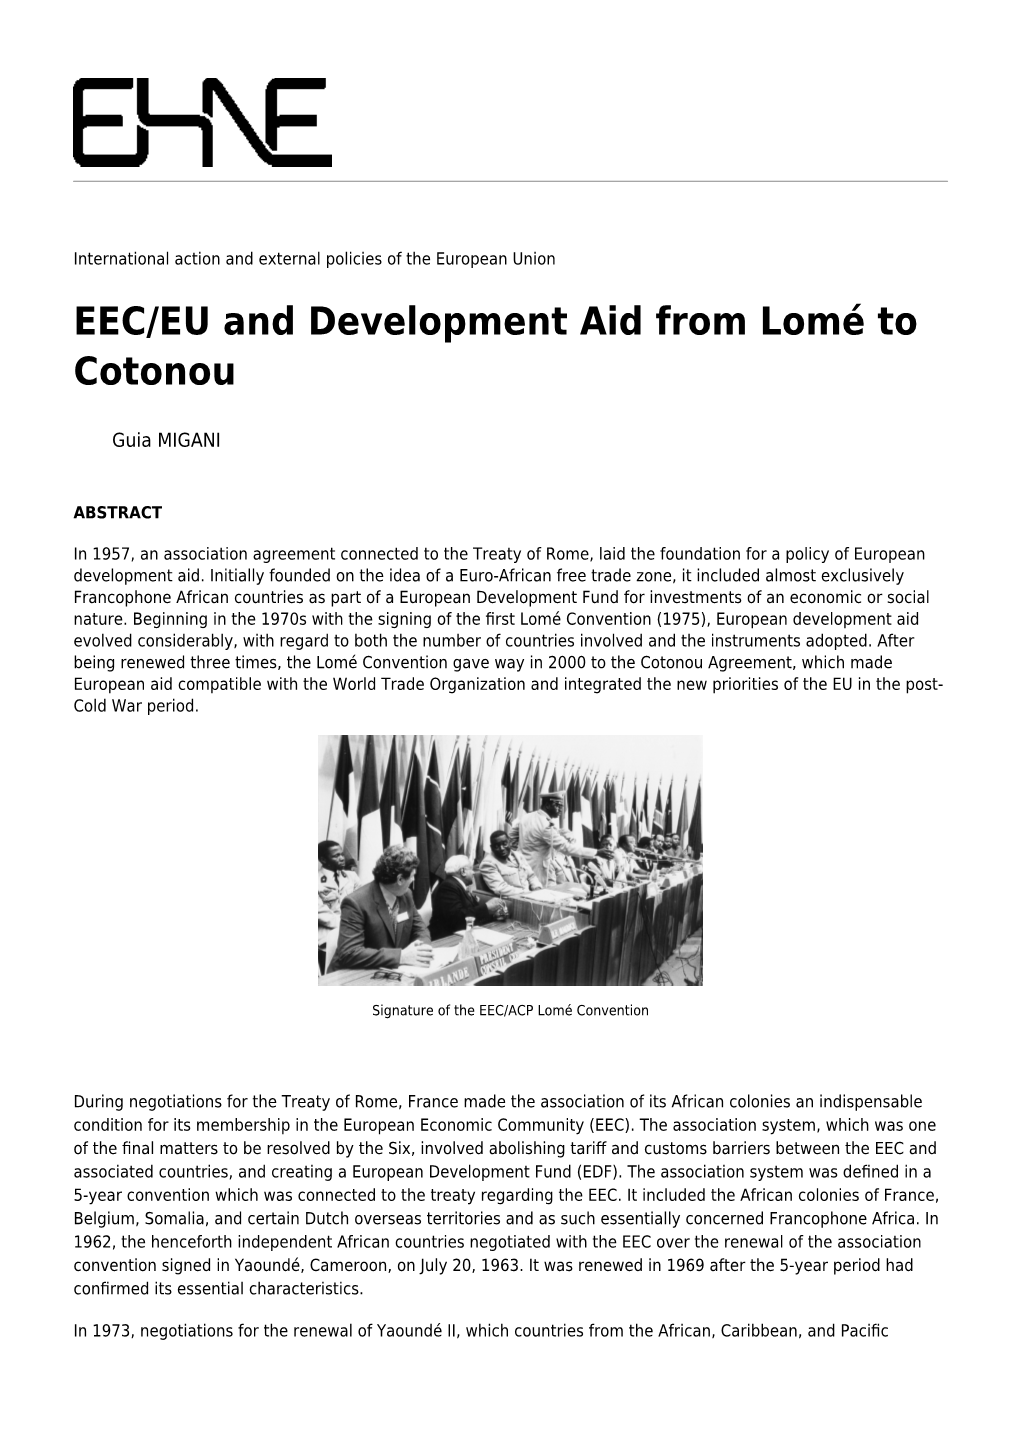 EEC/EU and Development Aid from Lomé to Cotonou